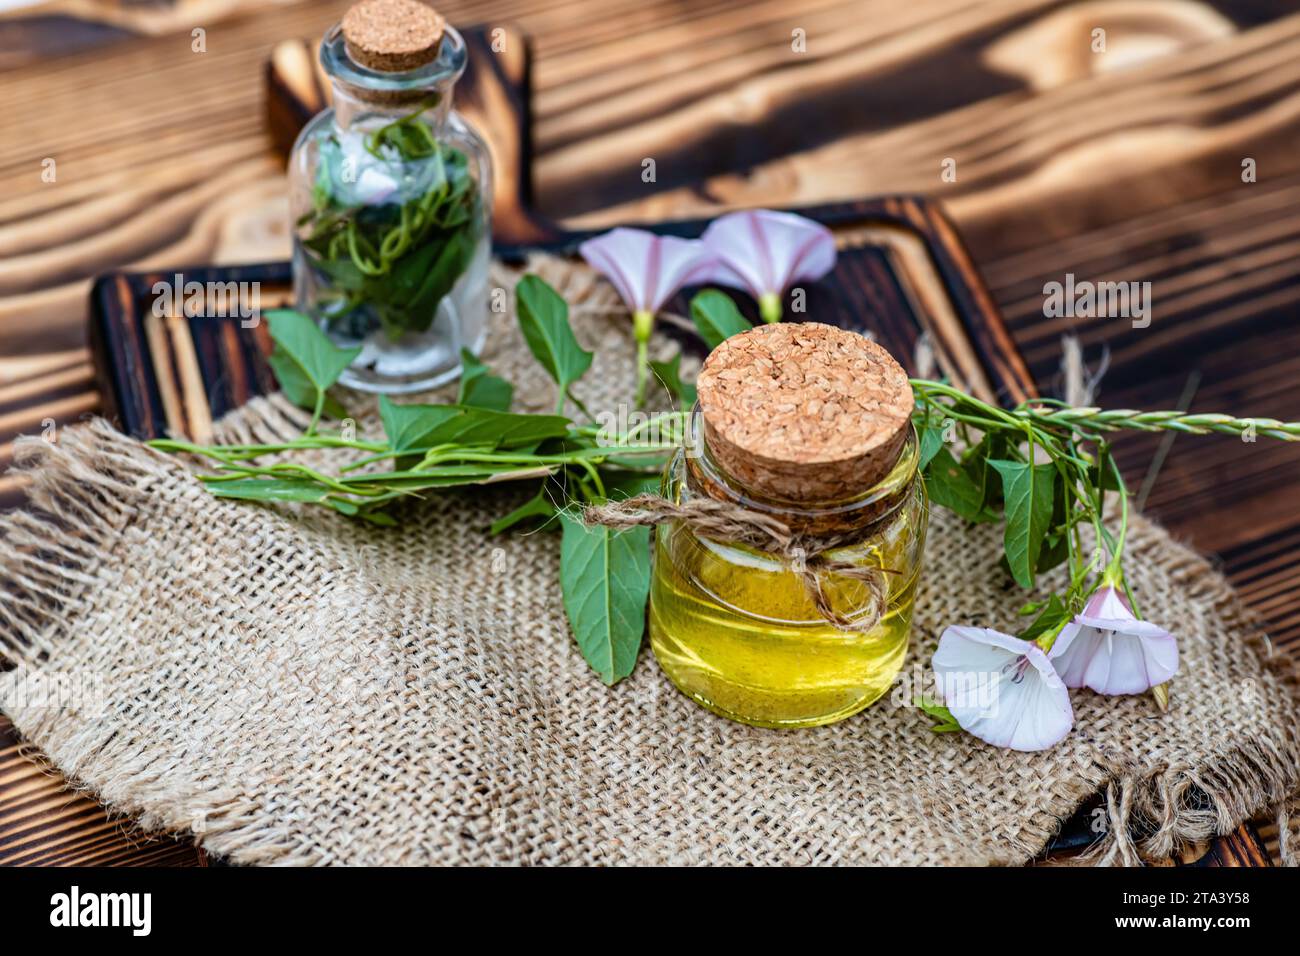 Convolvulus arvensis, or field bindweed making an elixir or tincture with essential oil from flowers Stock Photo